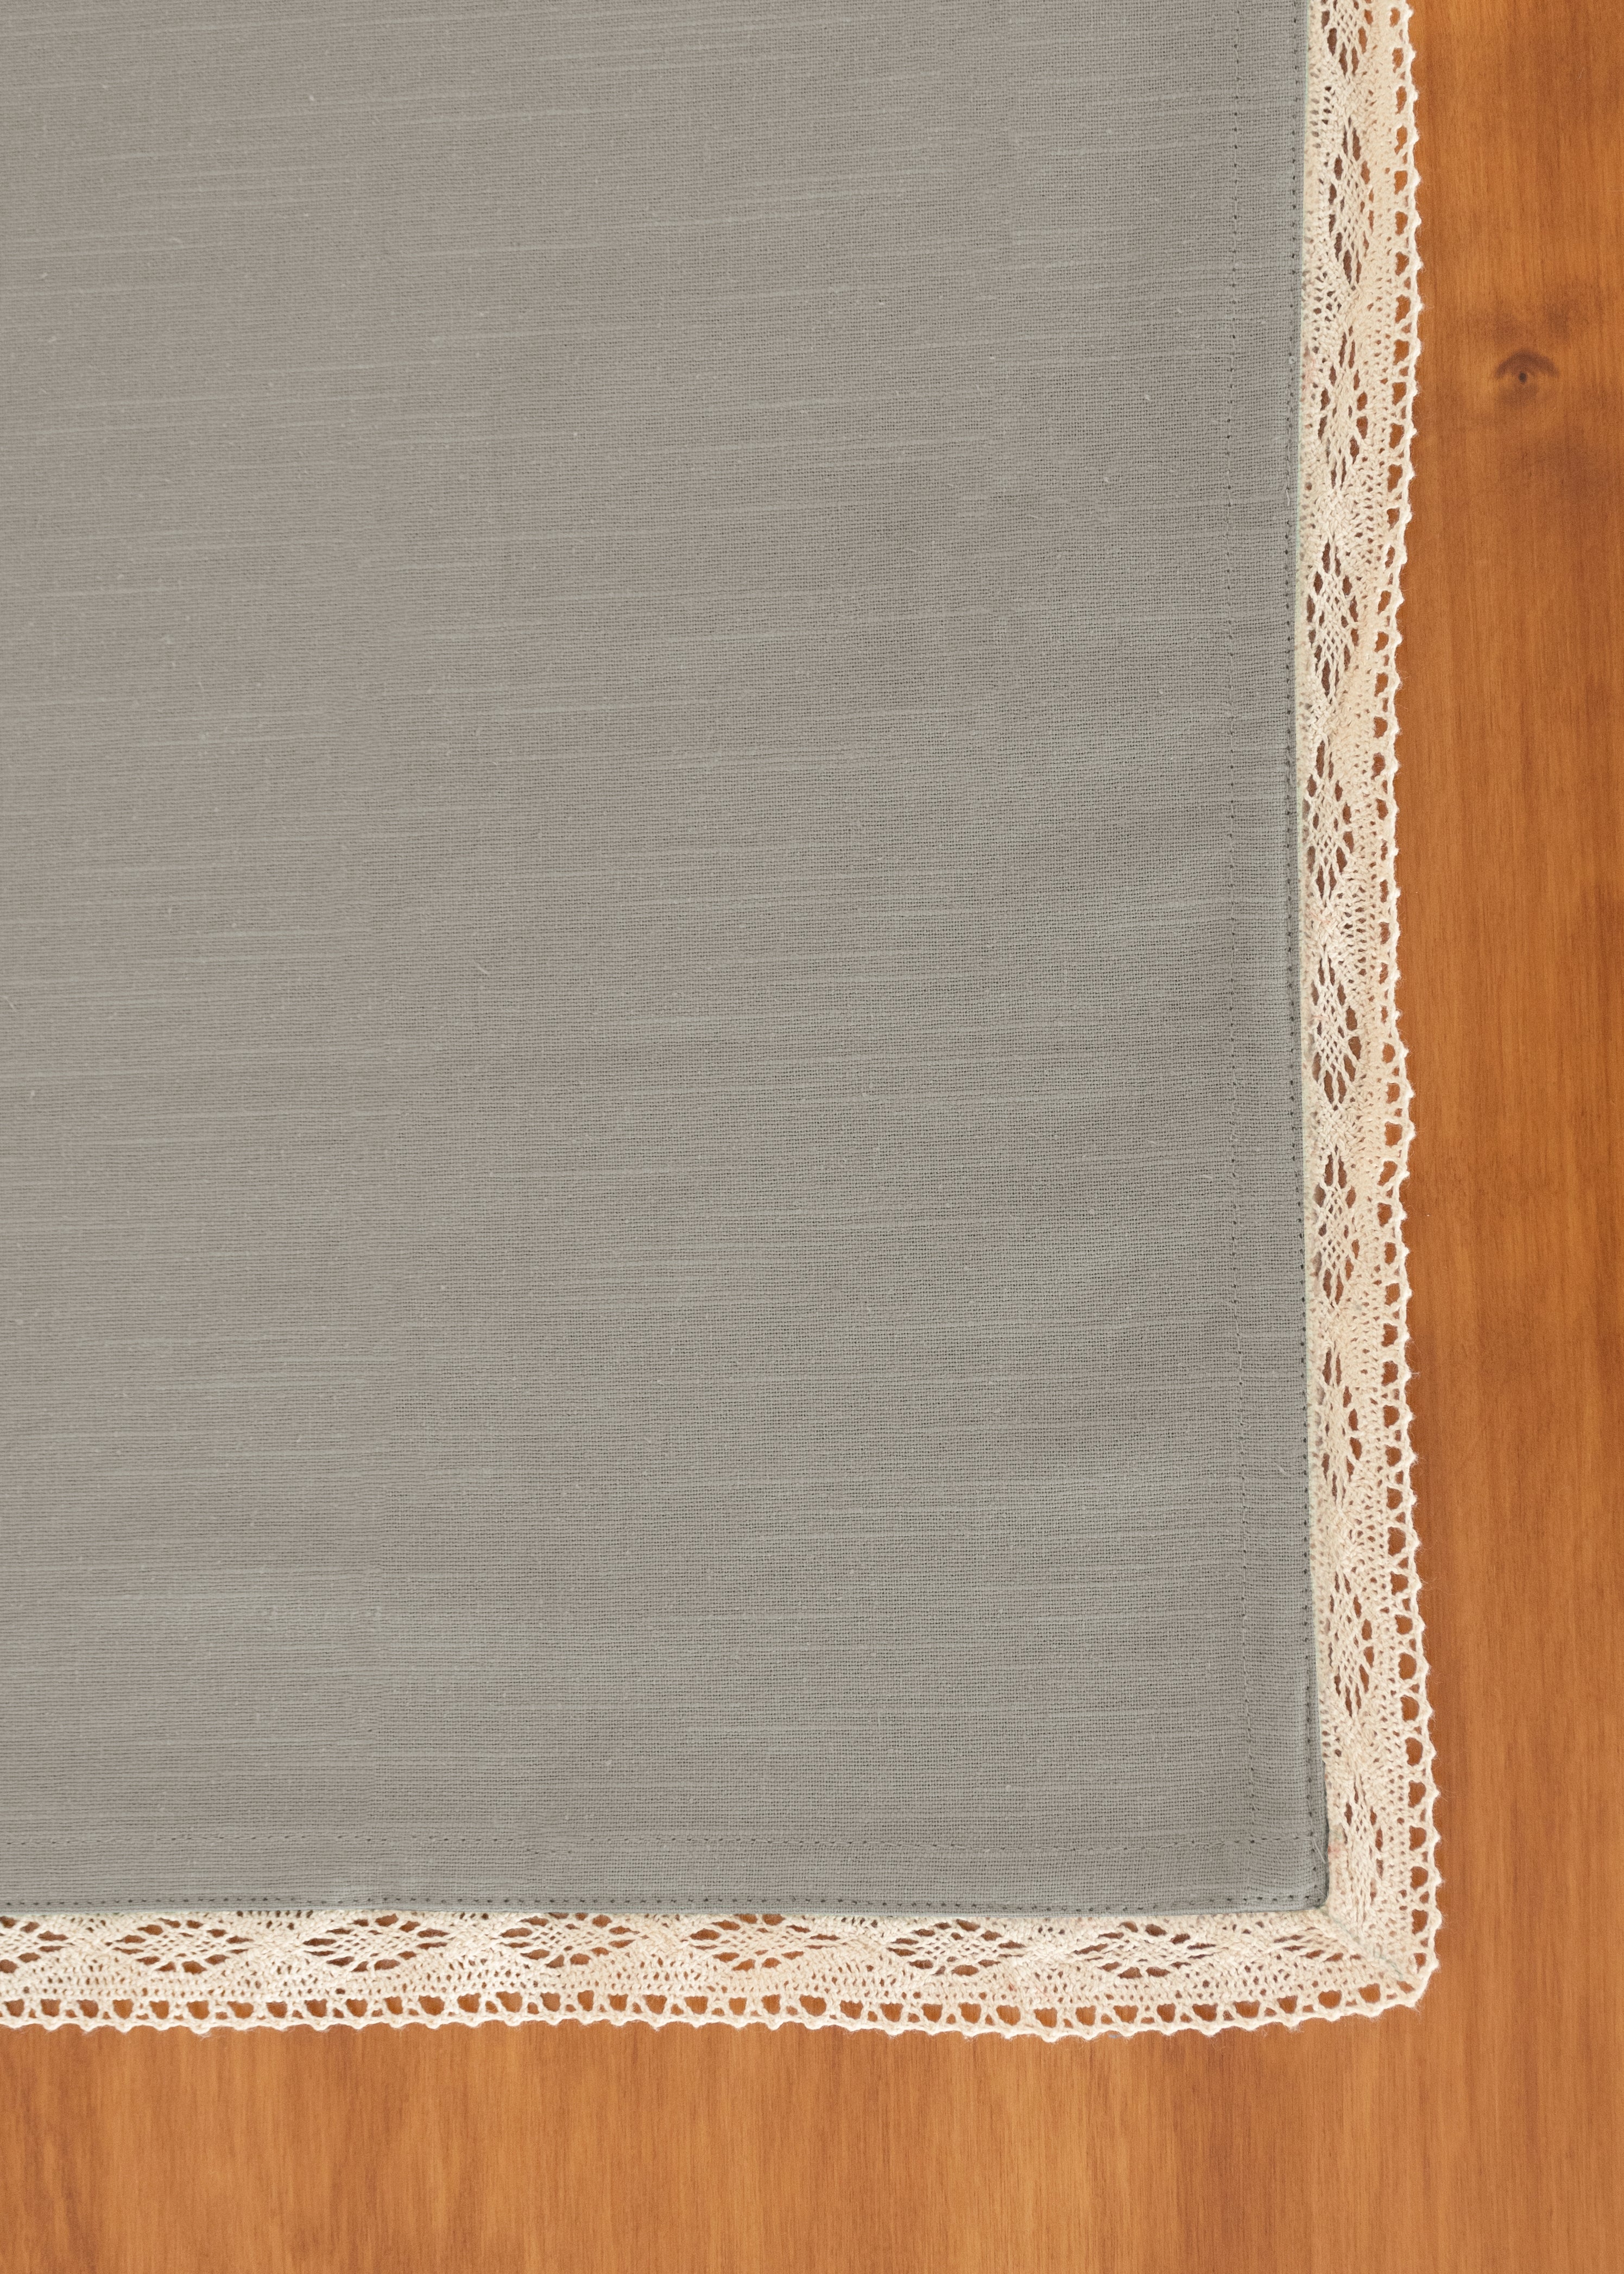 Solid Walnut Grey 100% cotton plain table cloth for 4 seater or 6 seater dining with lace border